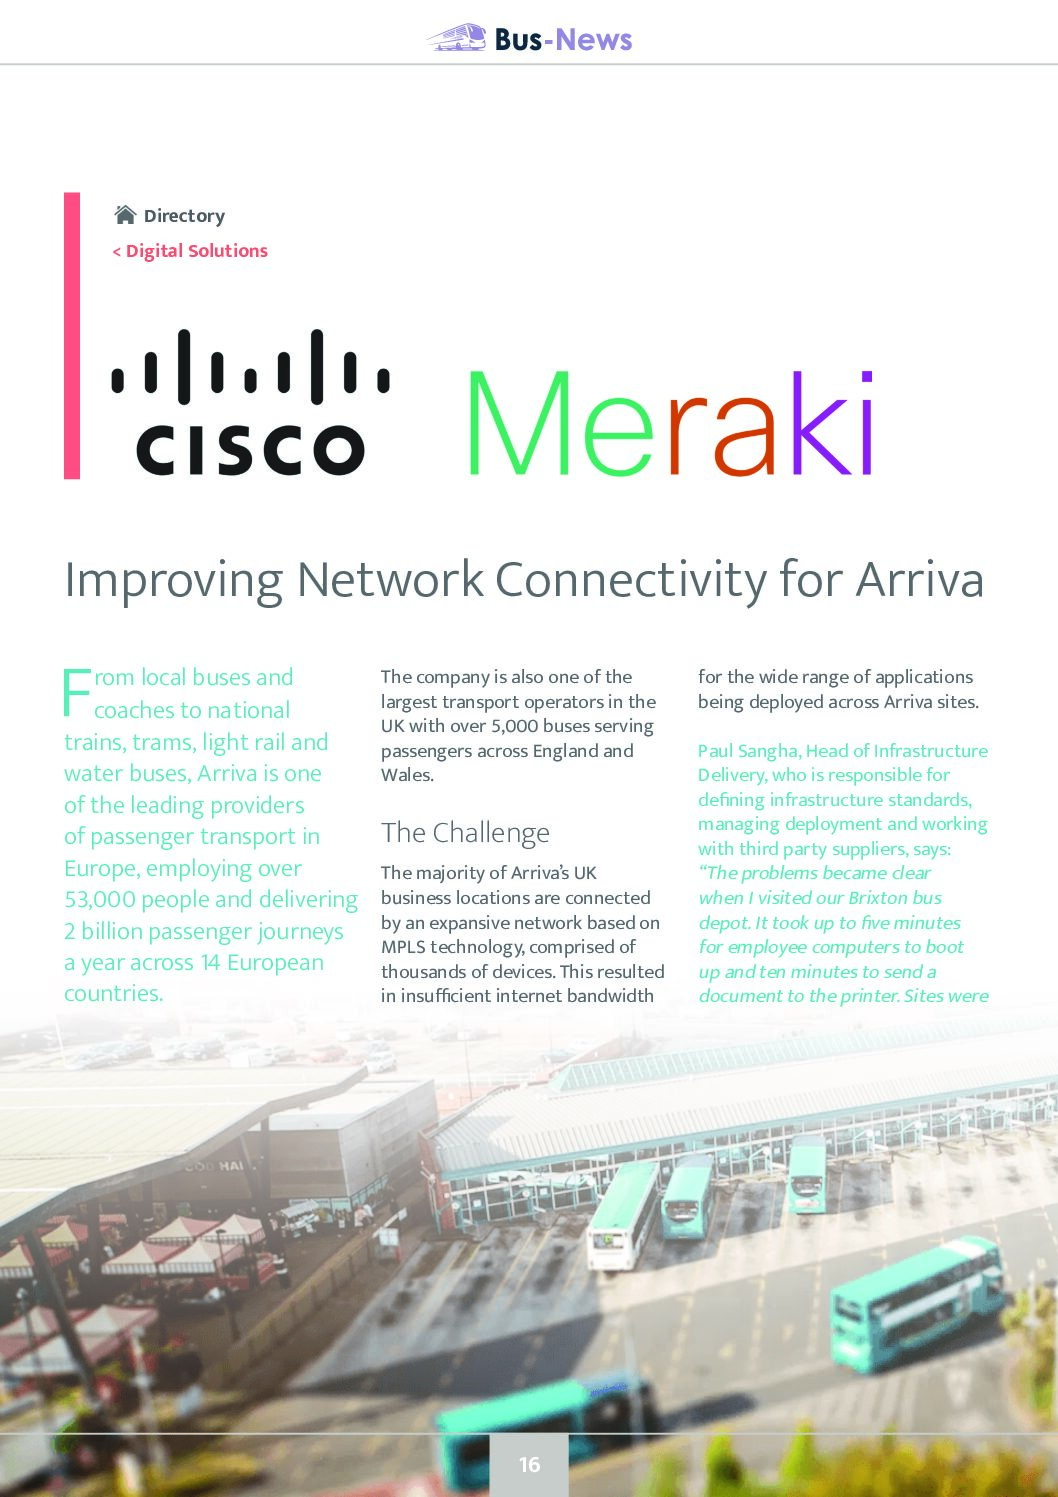 Improving Network Connectivity for Arriva